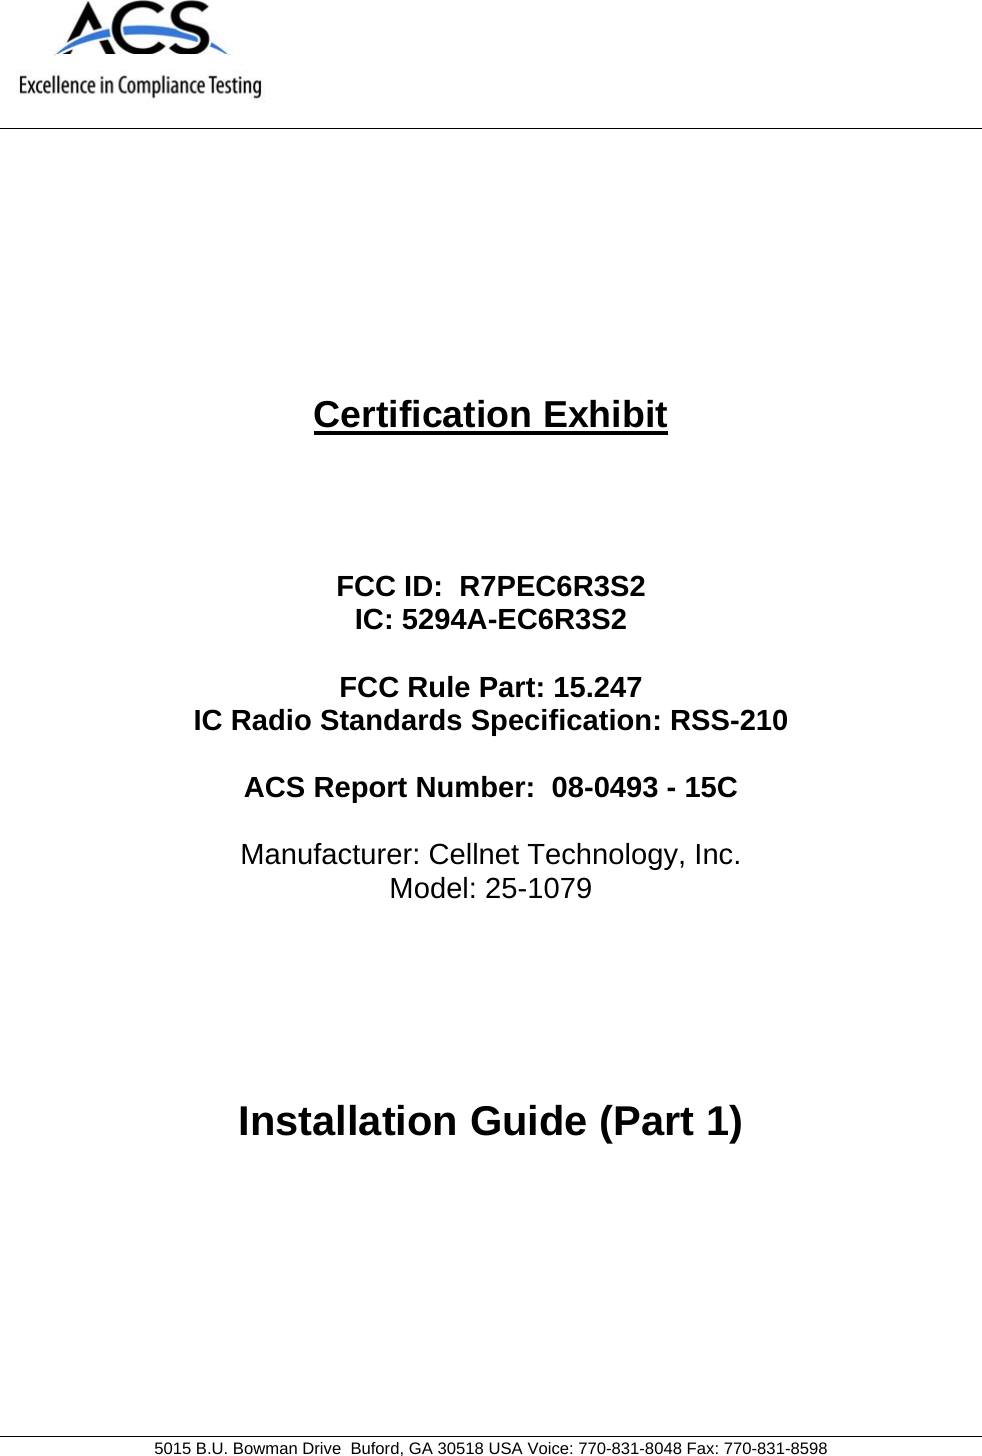     5015 B.U. Bowman Drive  Buford, GA 30518 USA Voice: 770-831-8048 Fax: 770-831-8598   Certification Exhibit     FCC ID:  R7PEC6R3S2 IC: 5294A-EC6R3S2  FCC Rule Part: 15.247 IC Radio Standards Specification: RSS-210  ACS Report Number:  08-0493 - 15C   Manufacturer: Cellnet Technology, Inc. Model: 25-1079     Installation Guide (Part 1)  